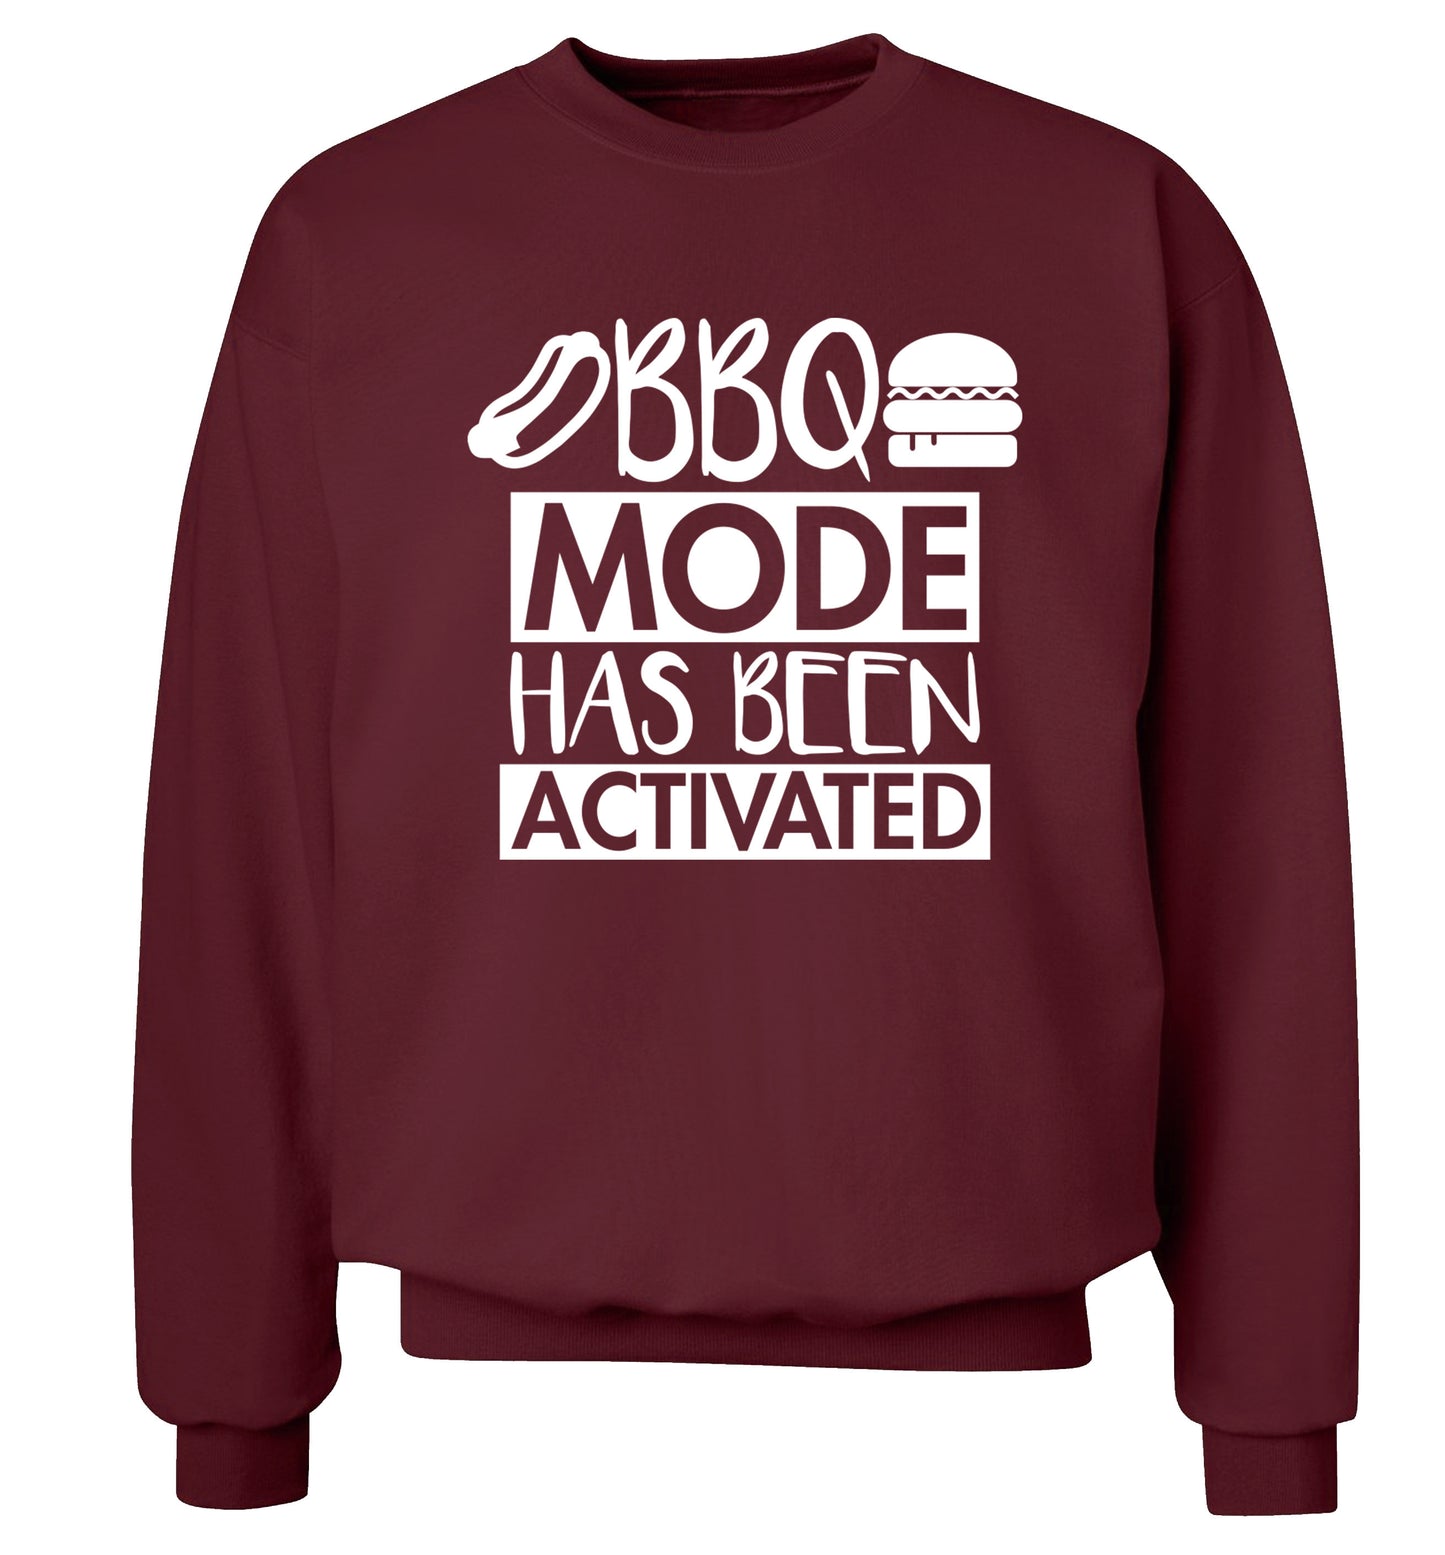 Bbq mode has been activated Adult's unisex maroon Sweater 2XL